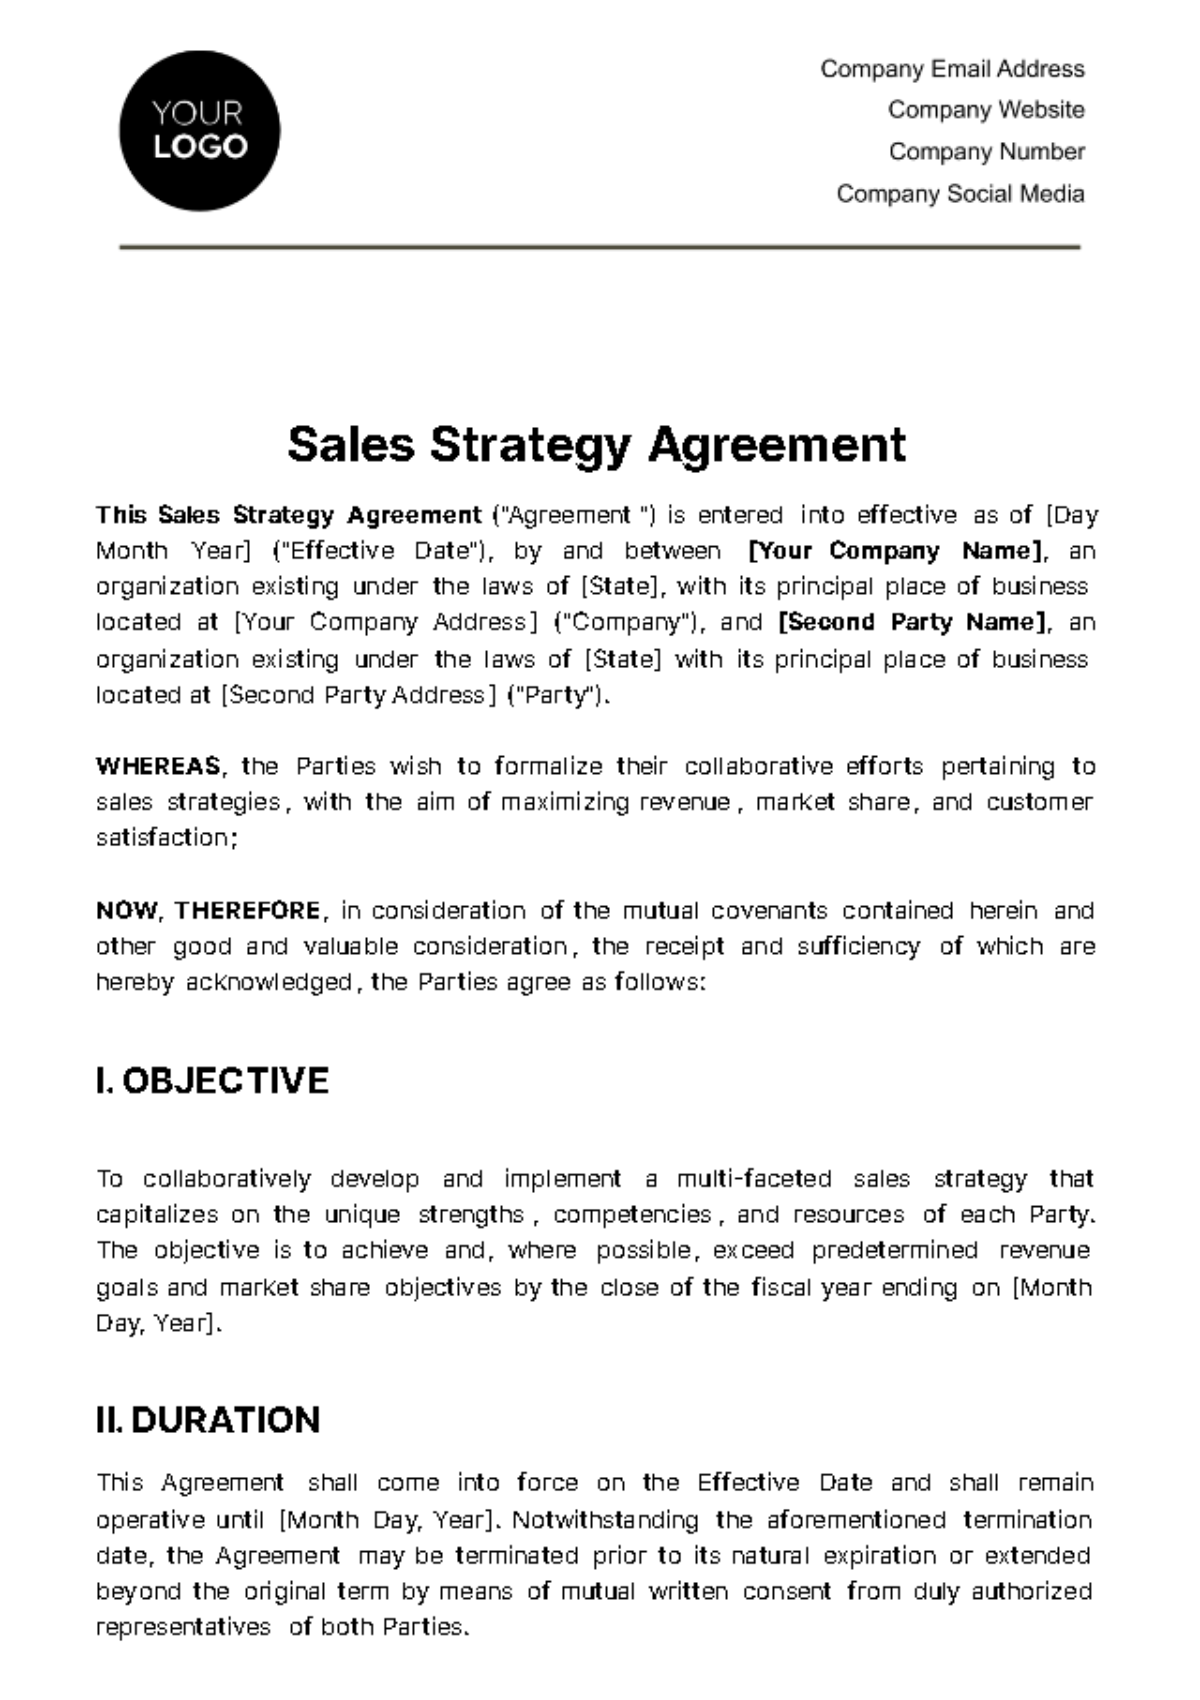 Free Sales Strategy Agreement Template